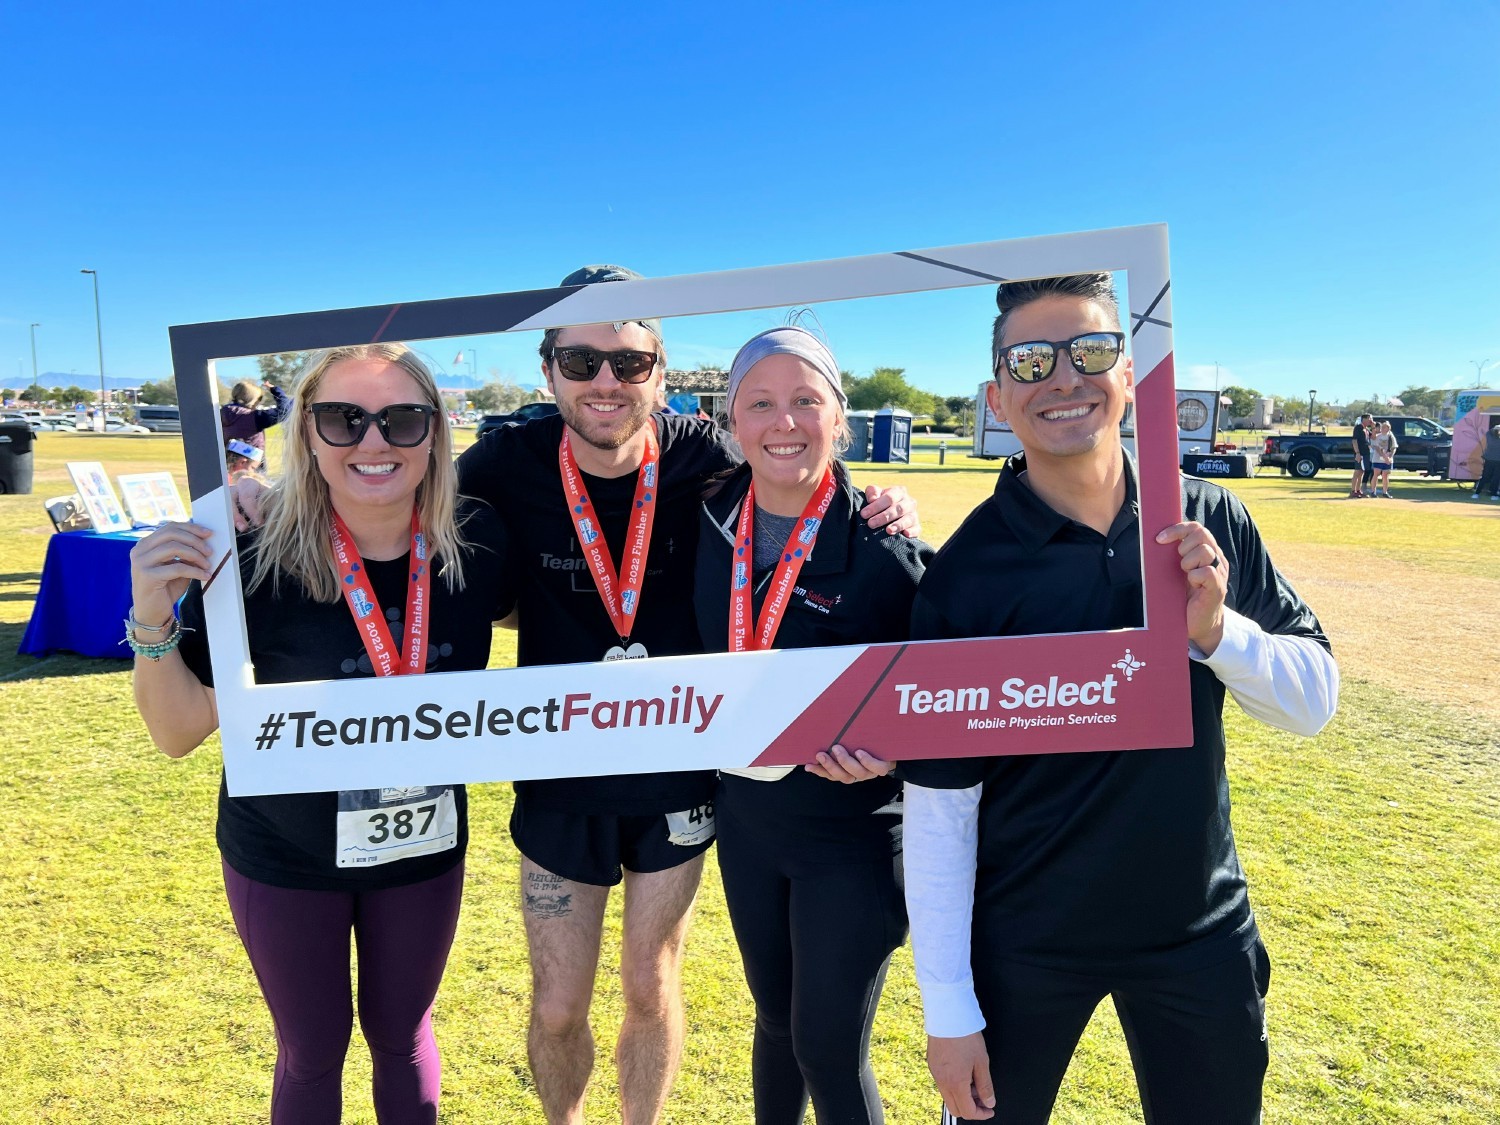 Team members out and about in the community sharing the #TeamSelectDifference!